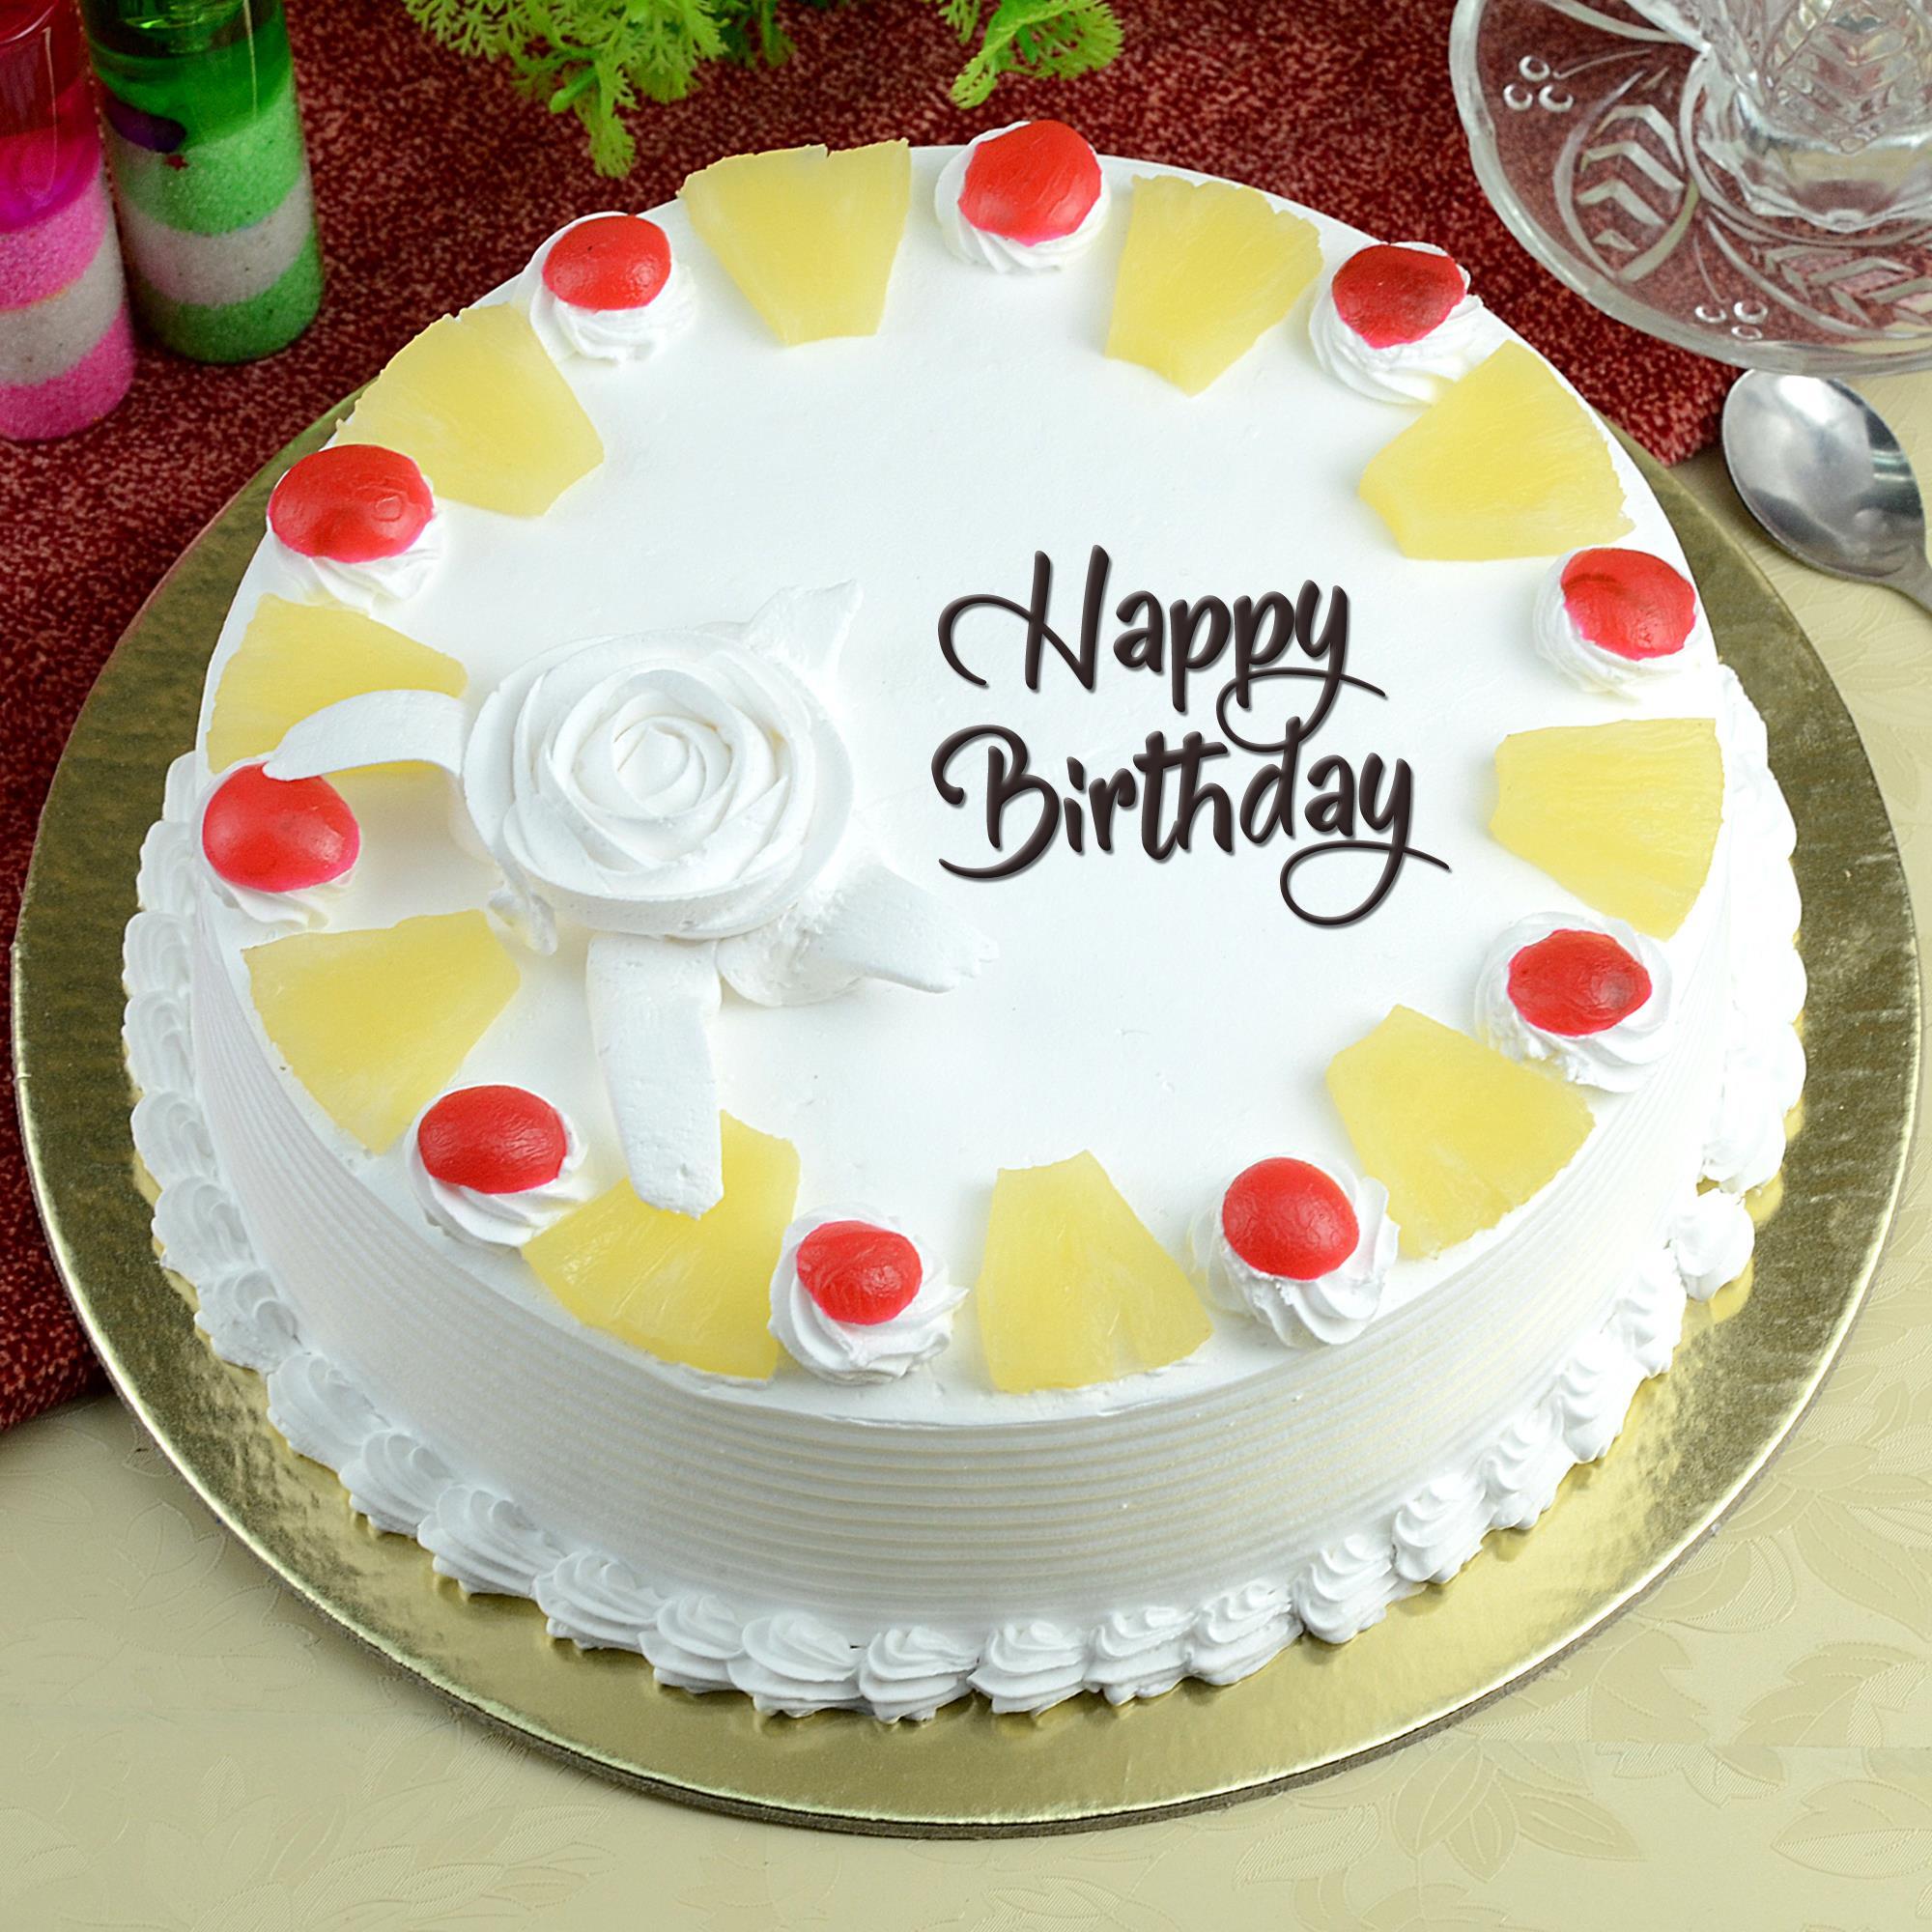 PAC003 - Pineapple Cake | Pineapple Cakes | Cake Delivery in Bhubaneswar –  Order Online Birthday Cakes | Cakes on Hand